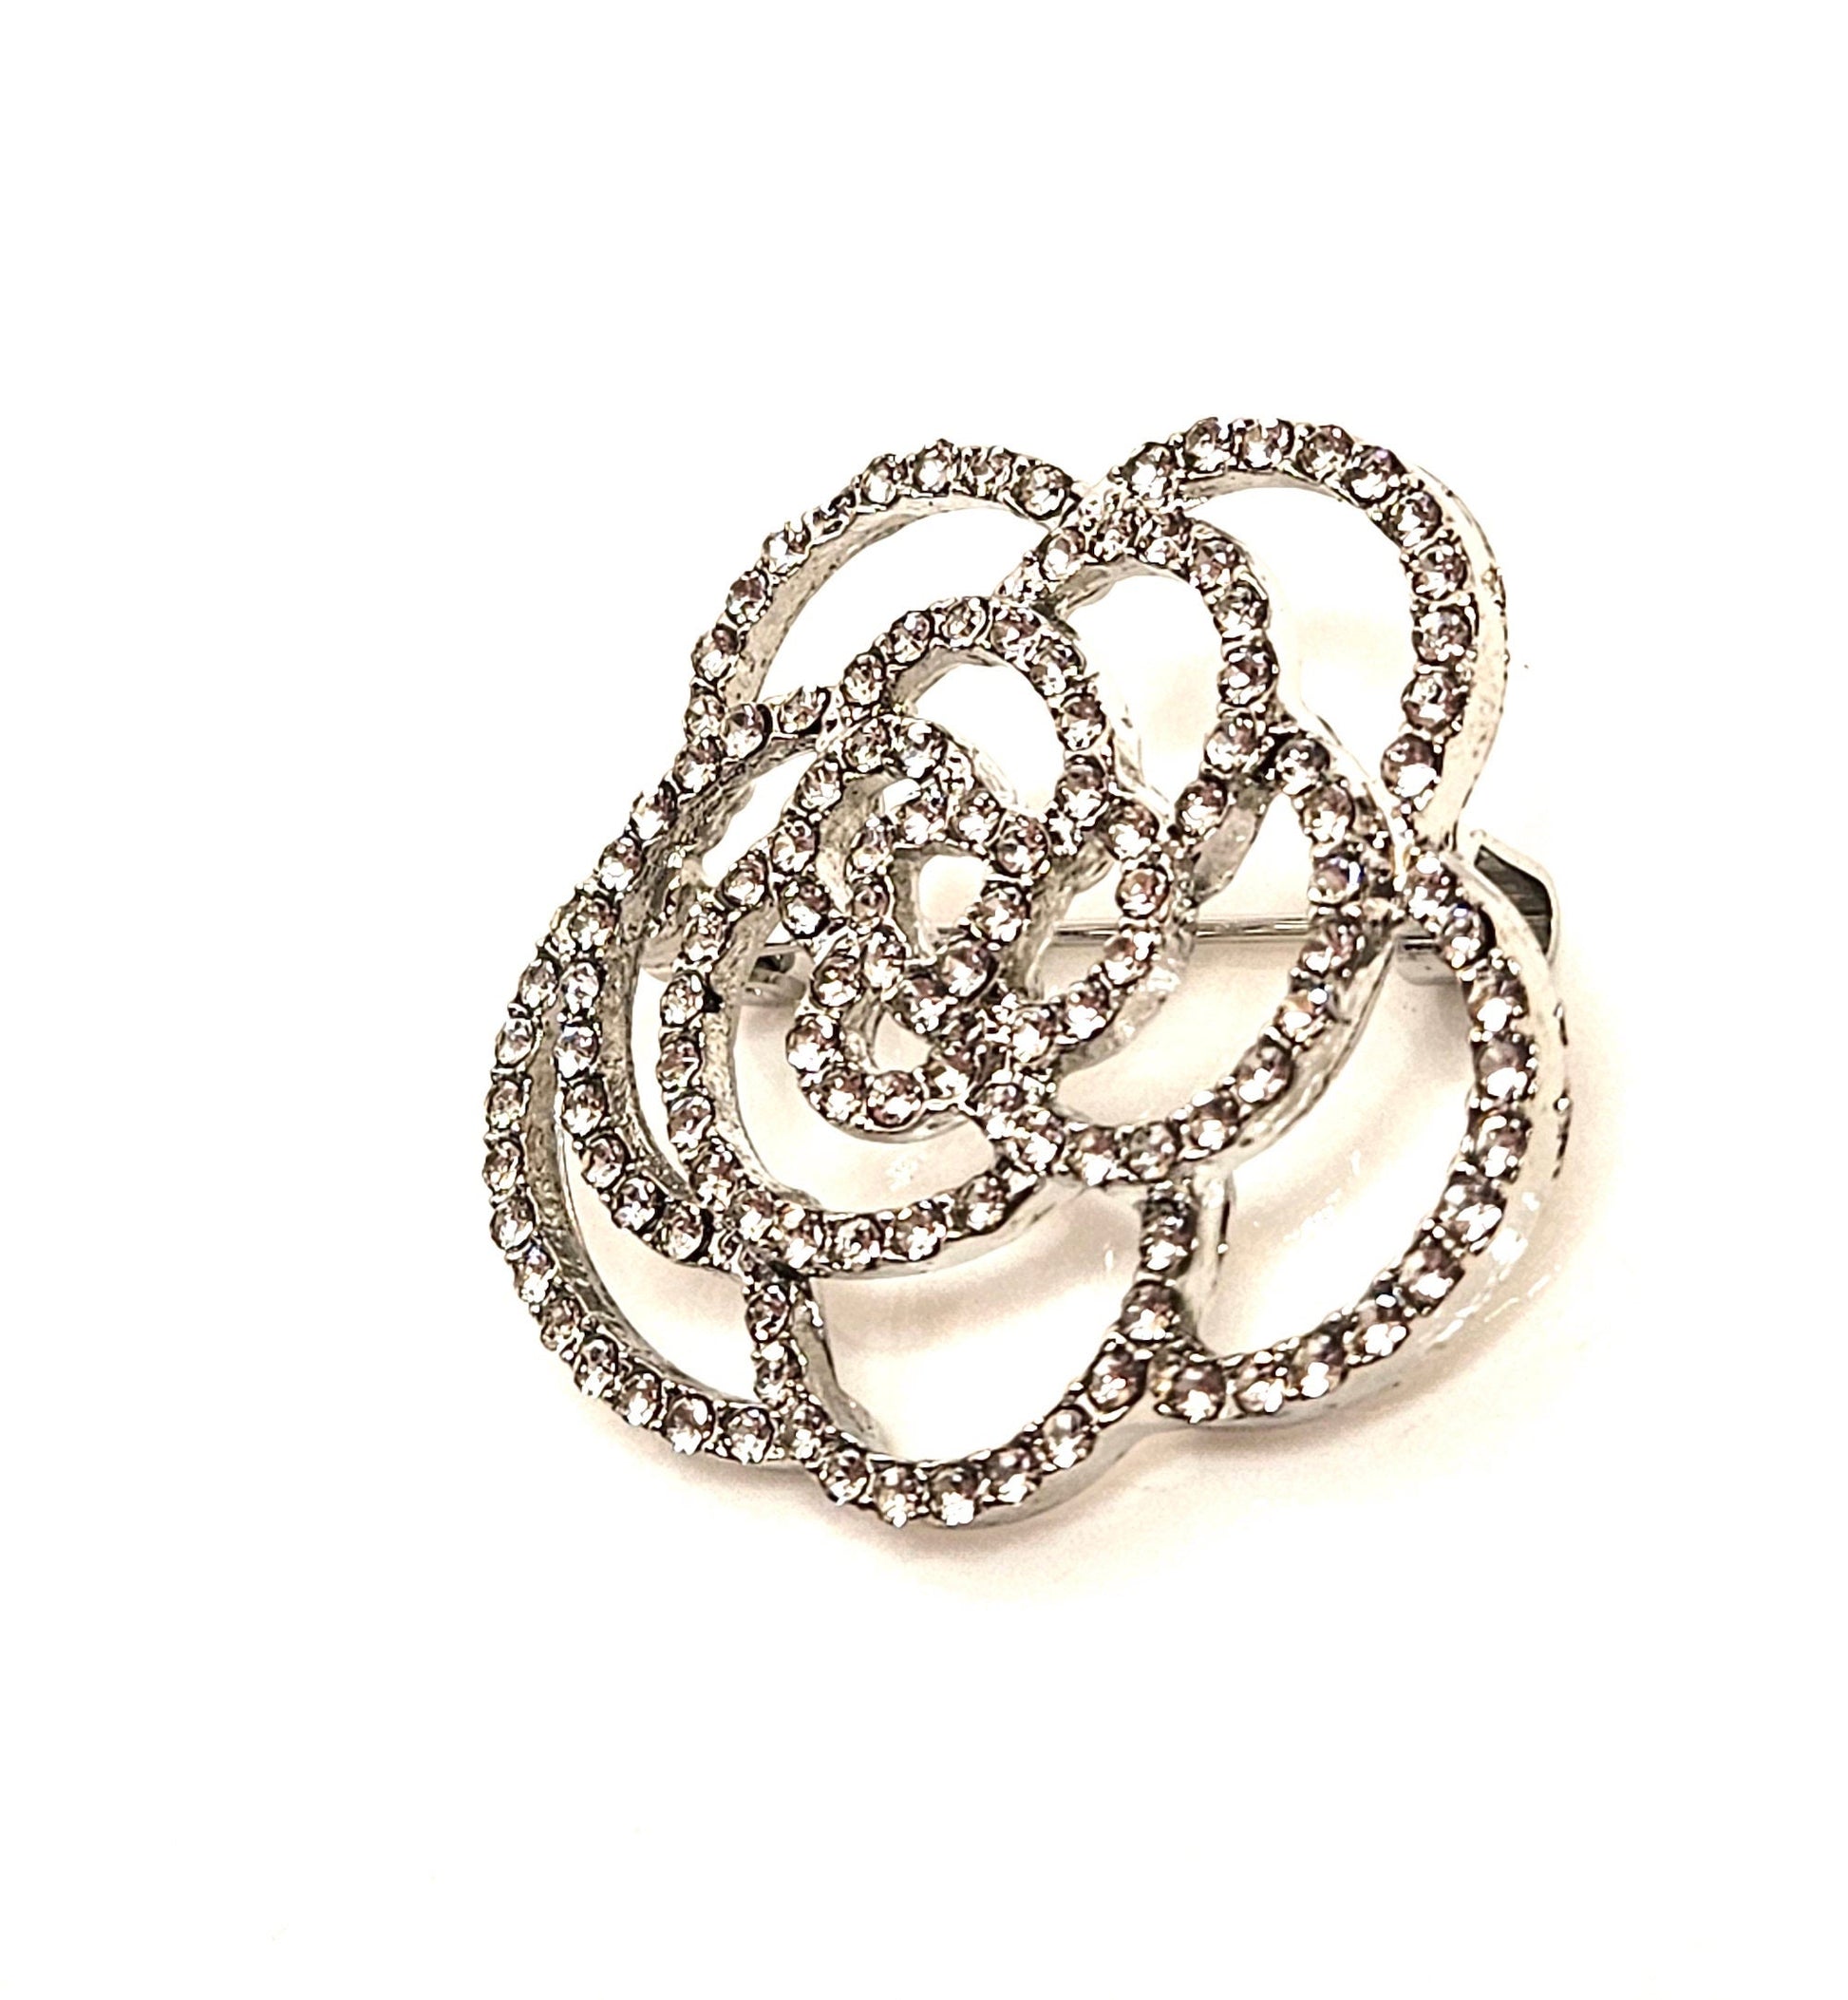 Sparkly Crystal Silver Camelia Brooch, Crystal Flower Pin, Statement Brooch, Very Sparkly Jacket Pin, Brooches For Women